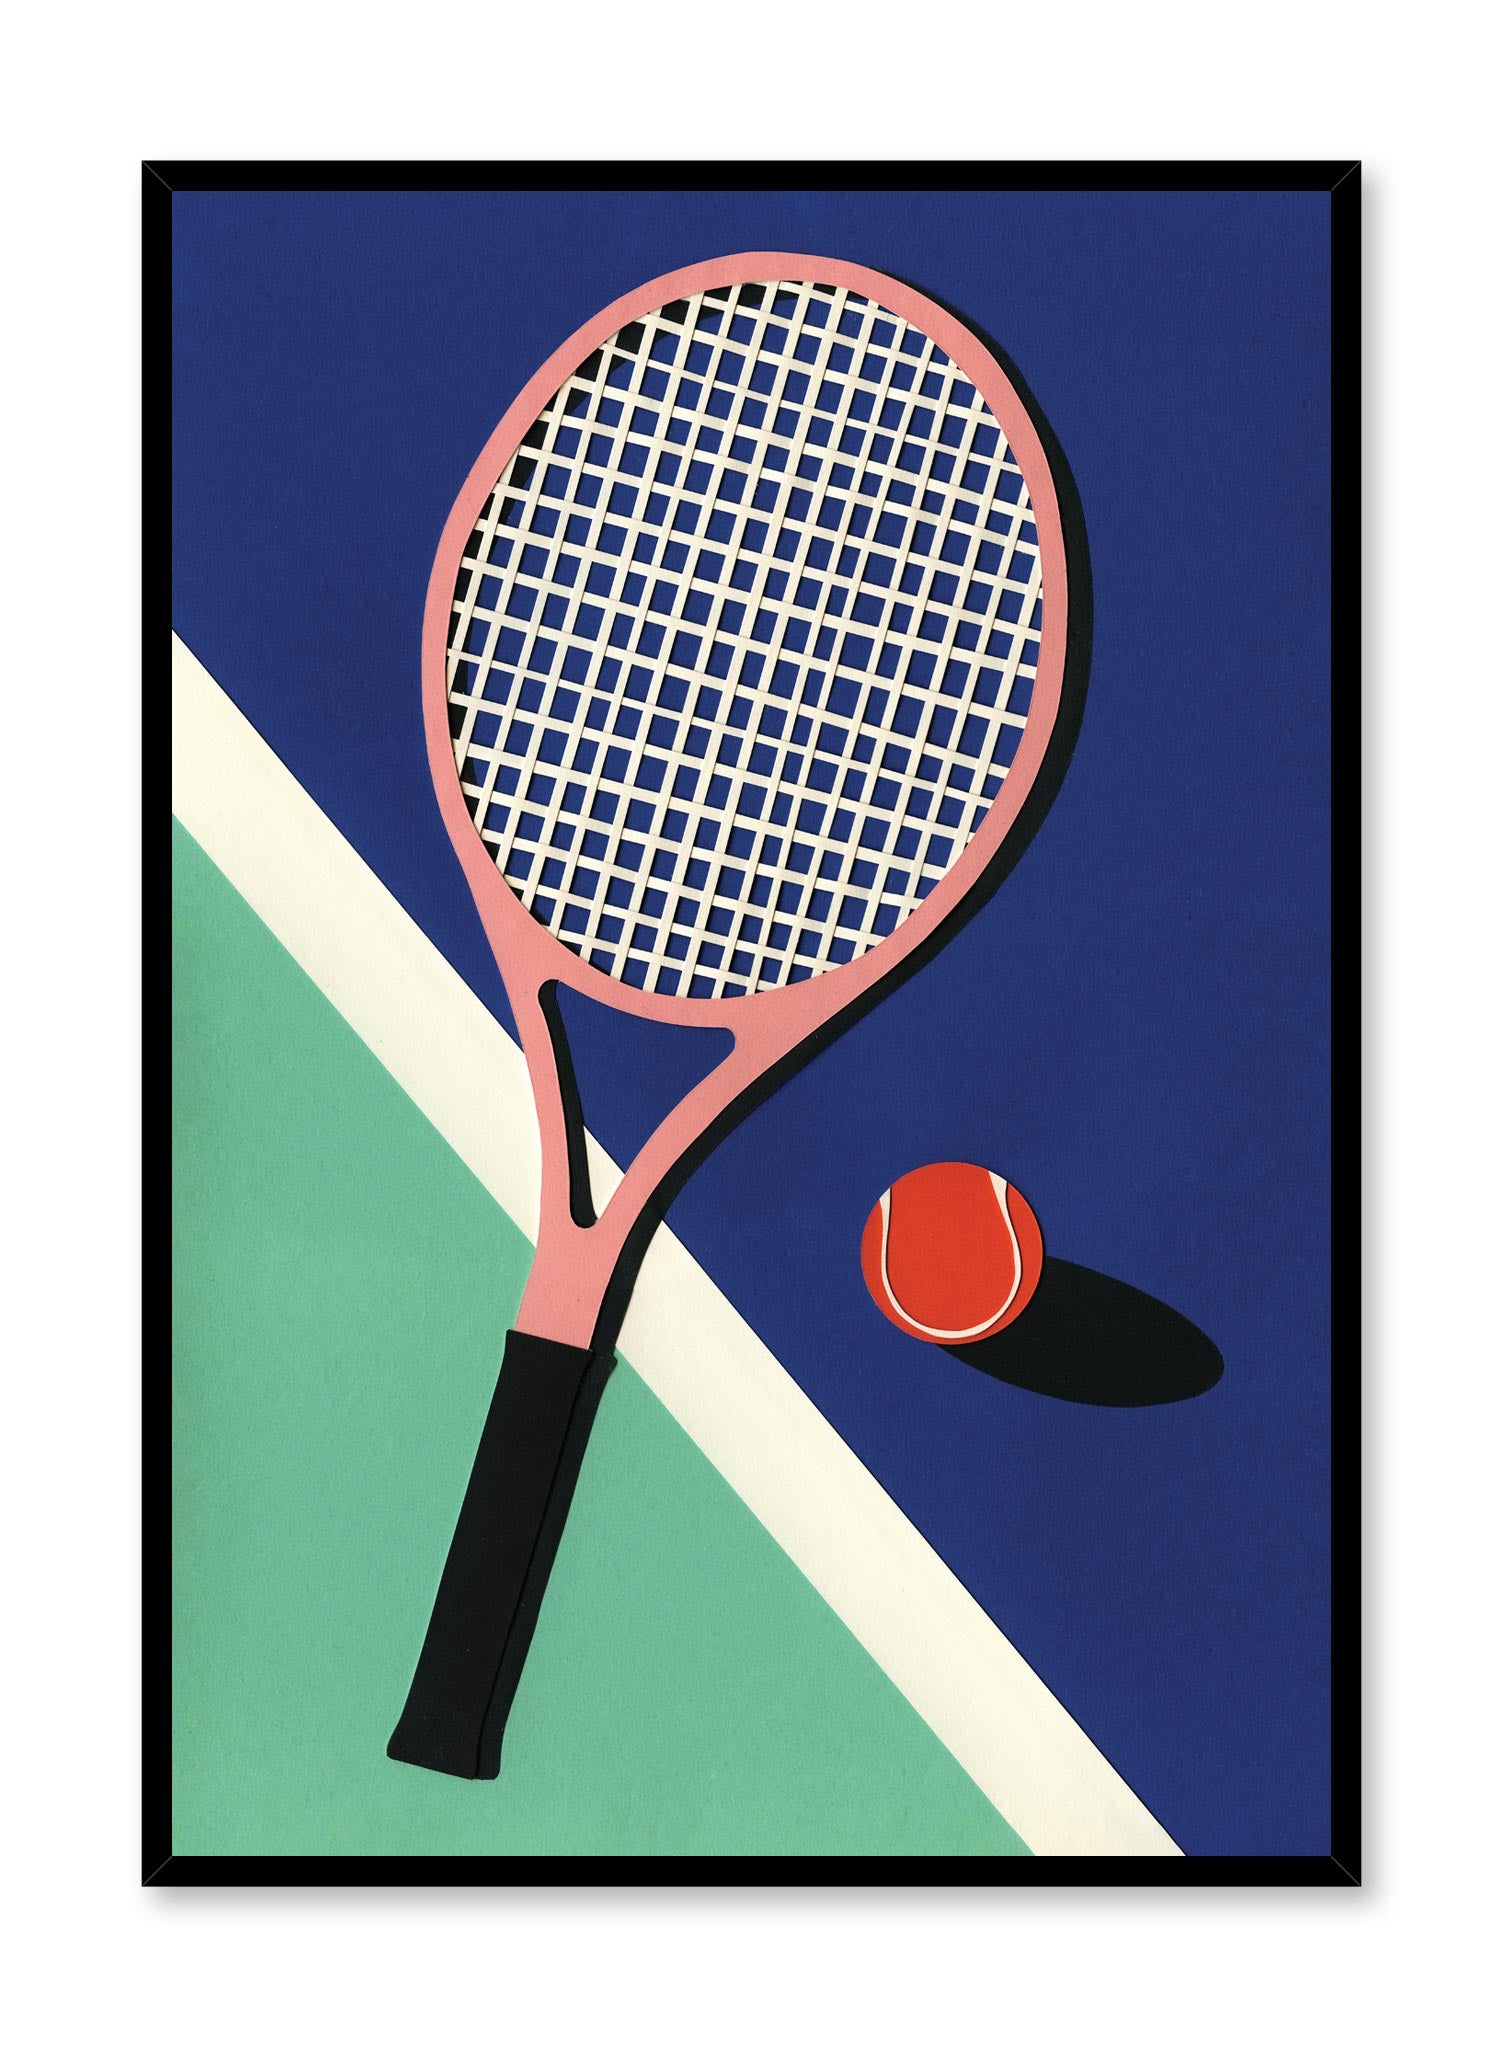 Modern minimalist poster by Opposite Wall with abstract collage illustration of tennis racket